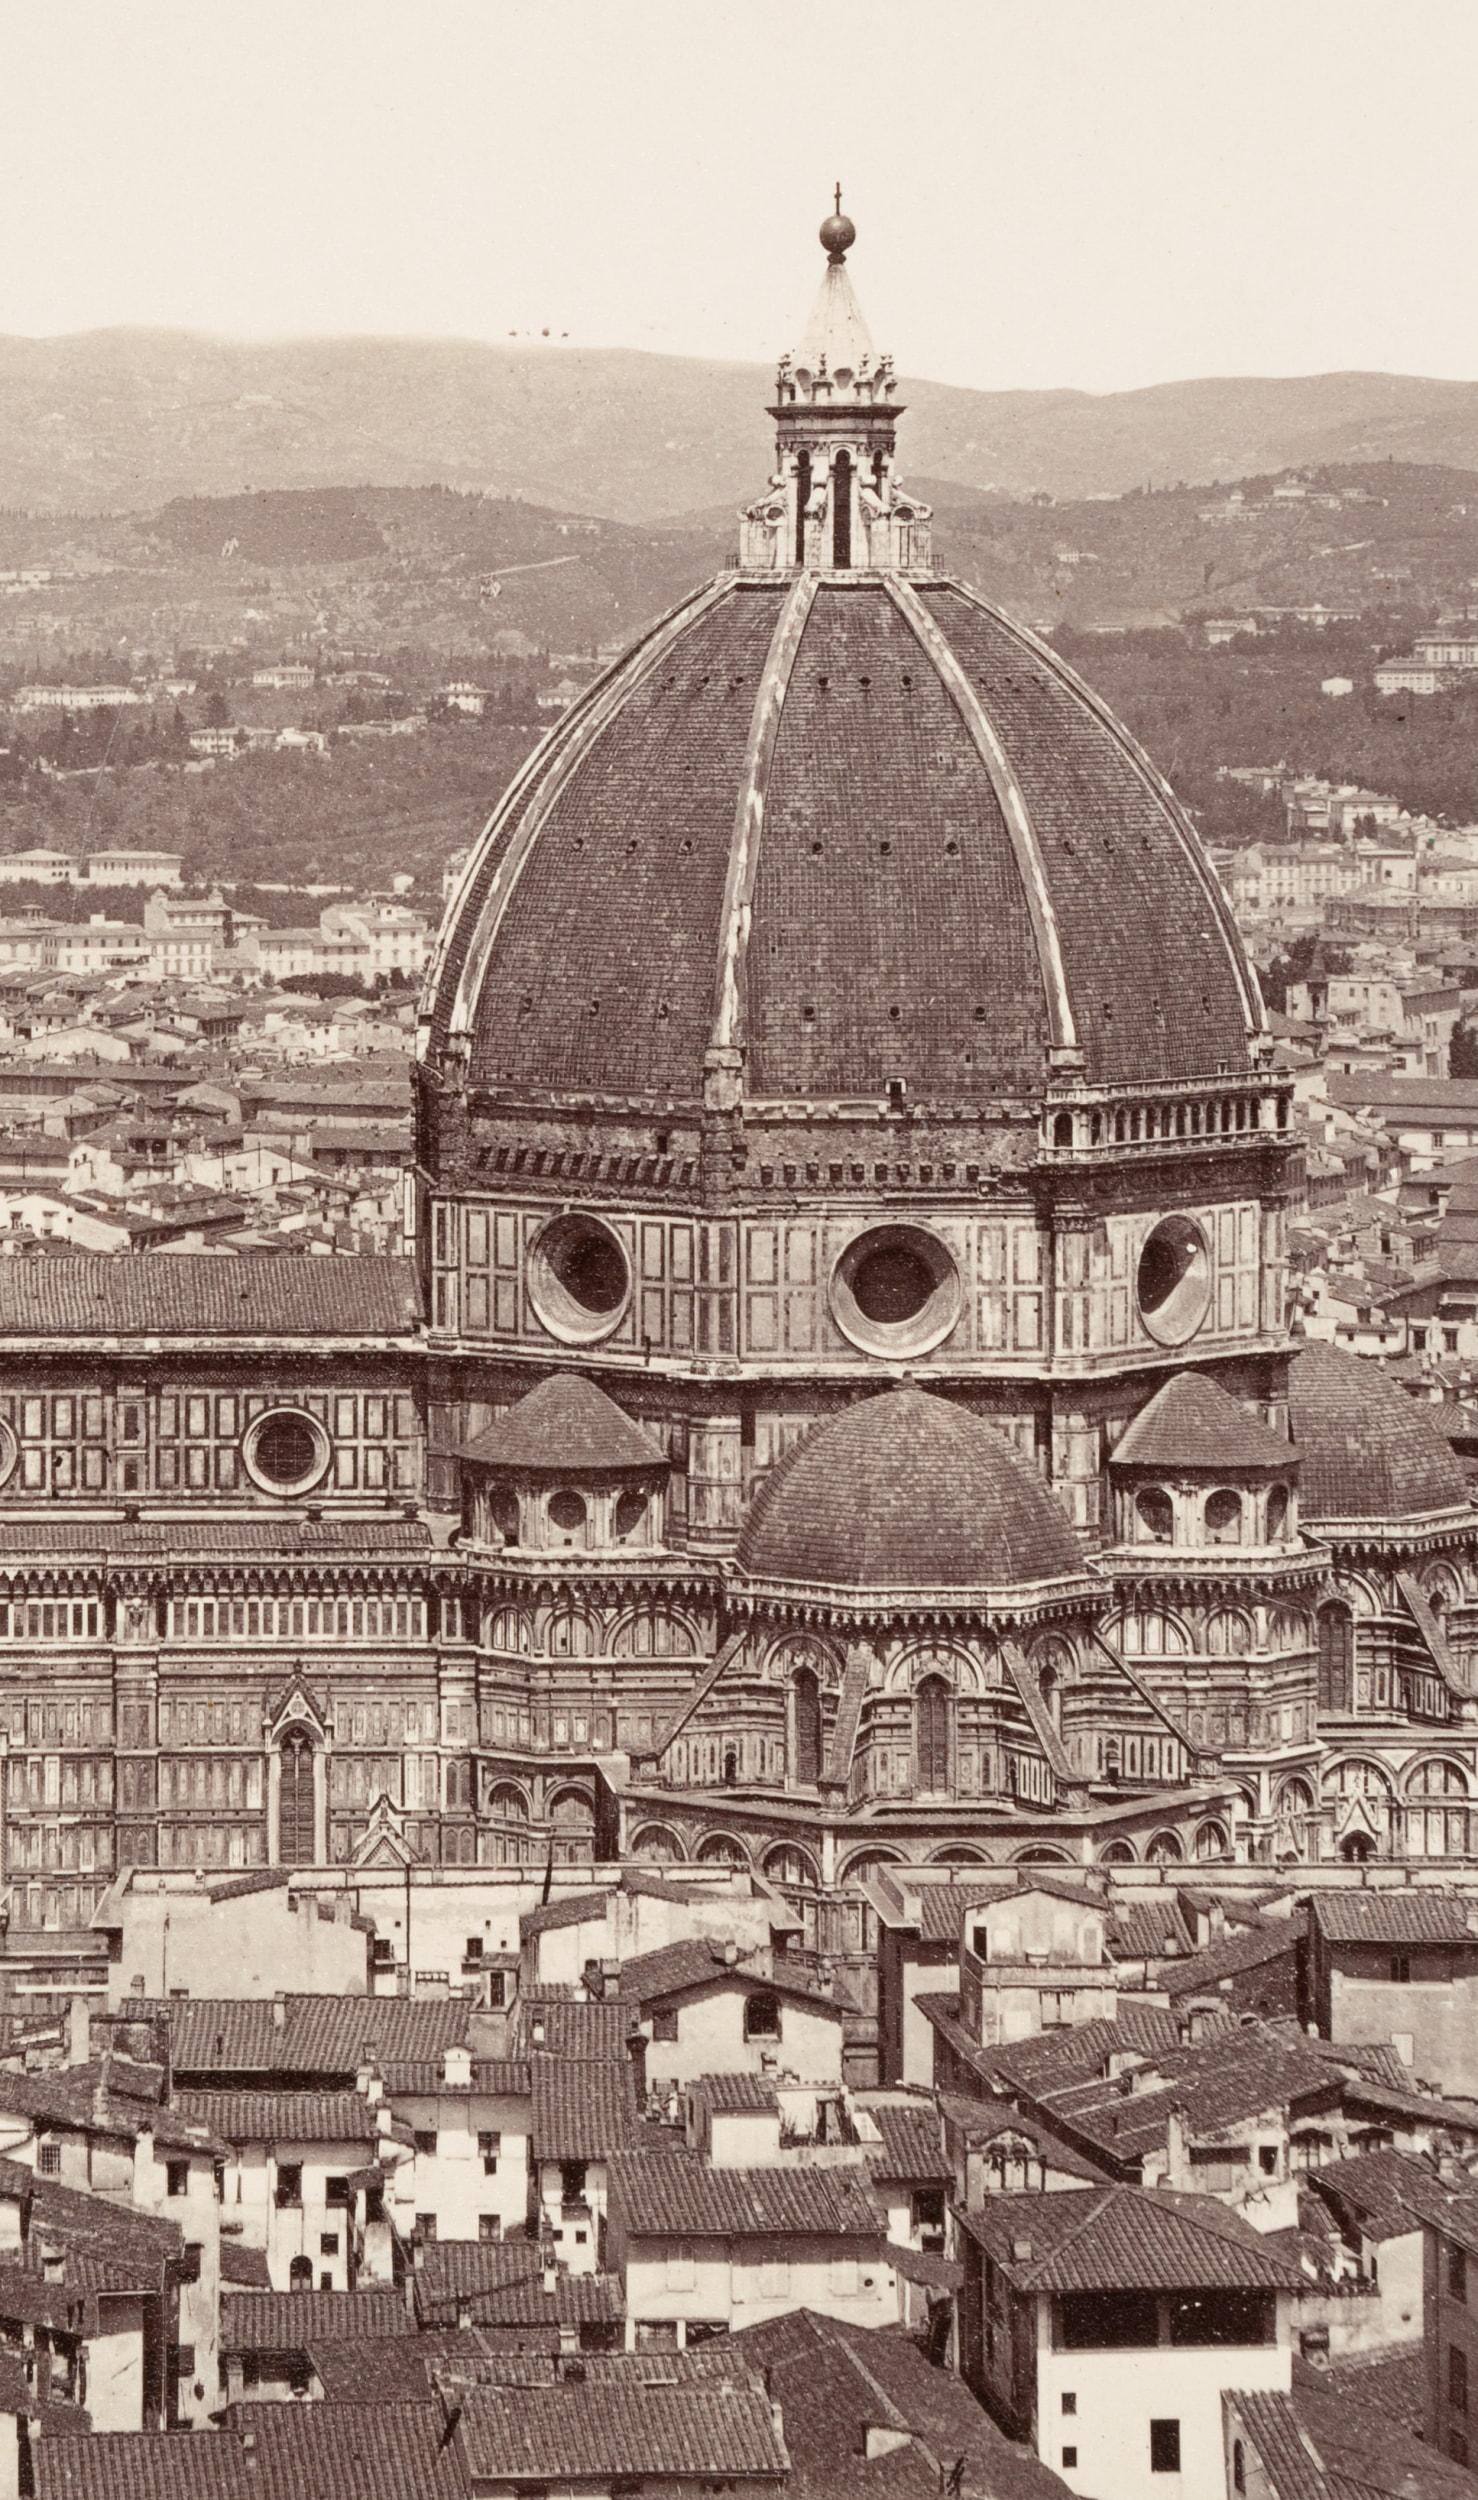 Fratelli Alinari (19th century) Circle: View over the rooftops of Florence 'Italy: Florence Cathedral, c. 1880, albumen paper print

Technique: albumen paper print, mounted on Cardboard

Inscription: At the lower part inscribed on the support: